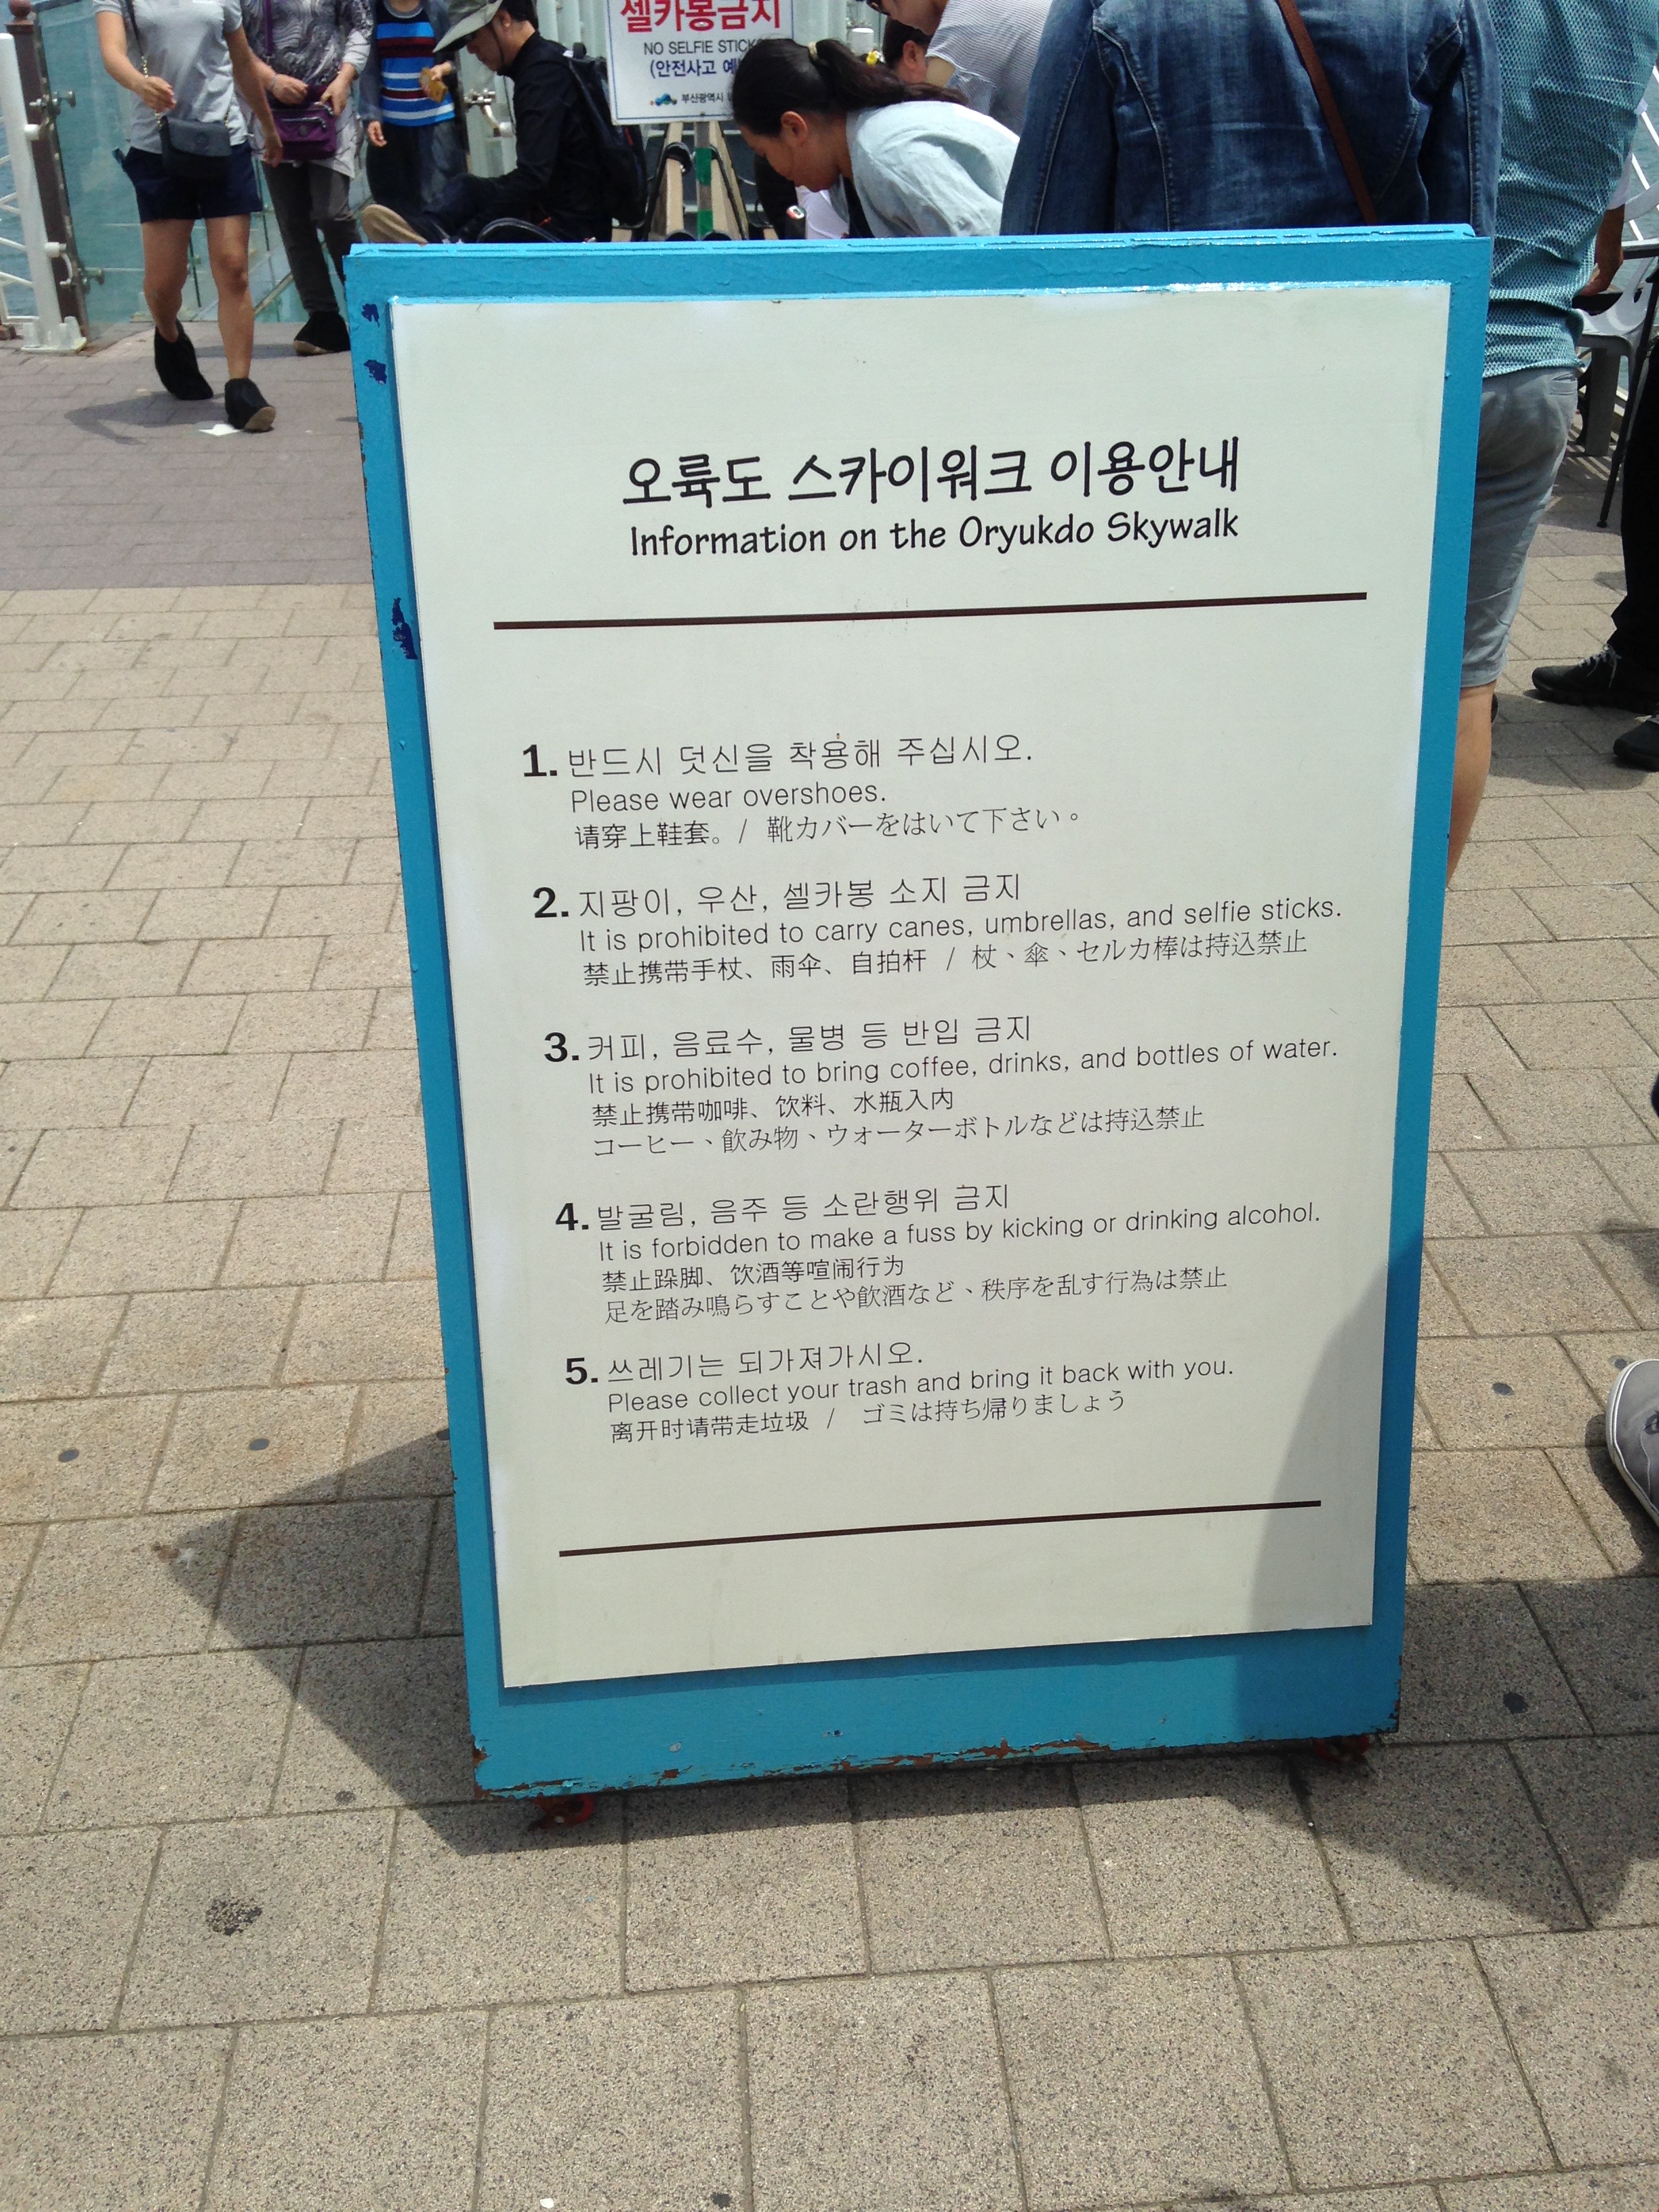 A sign on a blue easel in English, Korean, and several other Asian scripts. The English reads as follows: Information on the Oryukdo Skywalk / 1. Please wear overshoes. / 2. It is prohibited to carry canes, umbrellas, and selfie sticks. / 3. It is prohibited to bring coffee, drinks, and bottles of water. / 4. It is forbidden to make a fuss by kicking or drinking alcohol. /  5. Please collect your trash and bring it back with you.